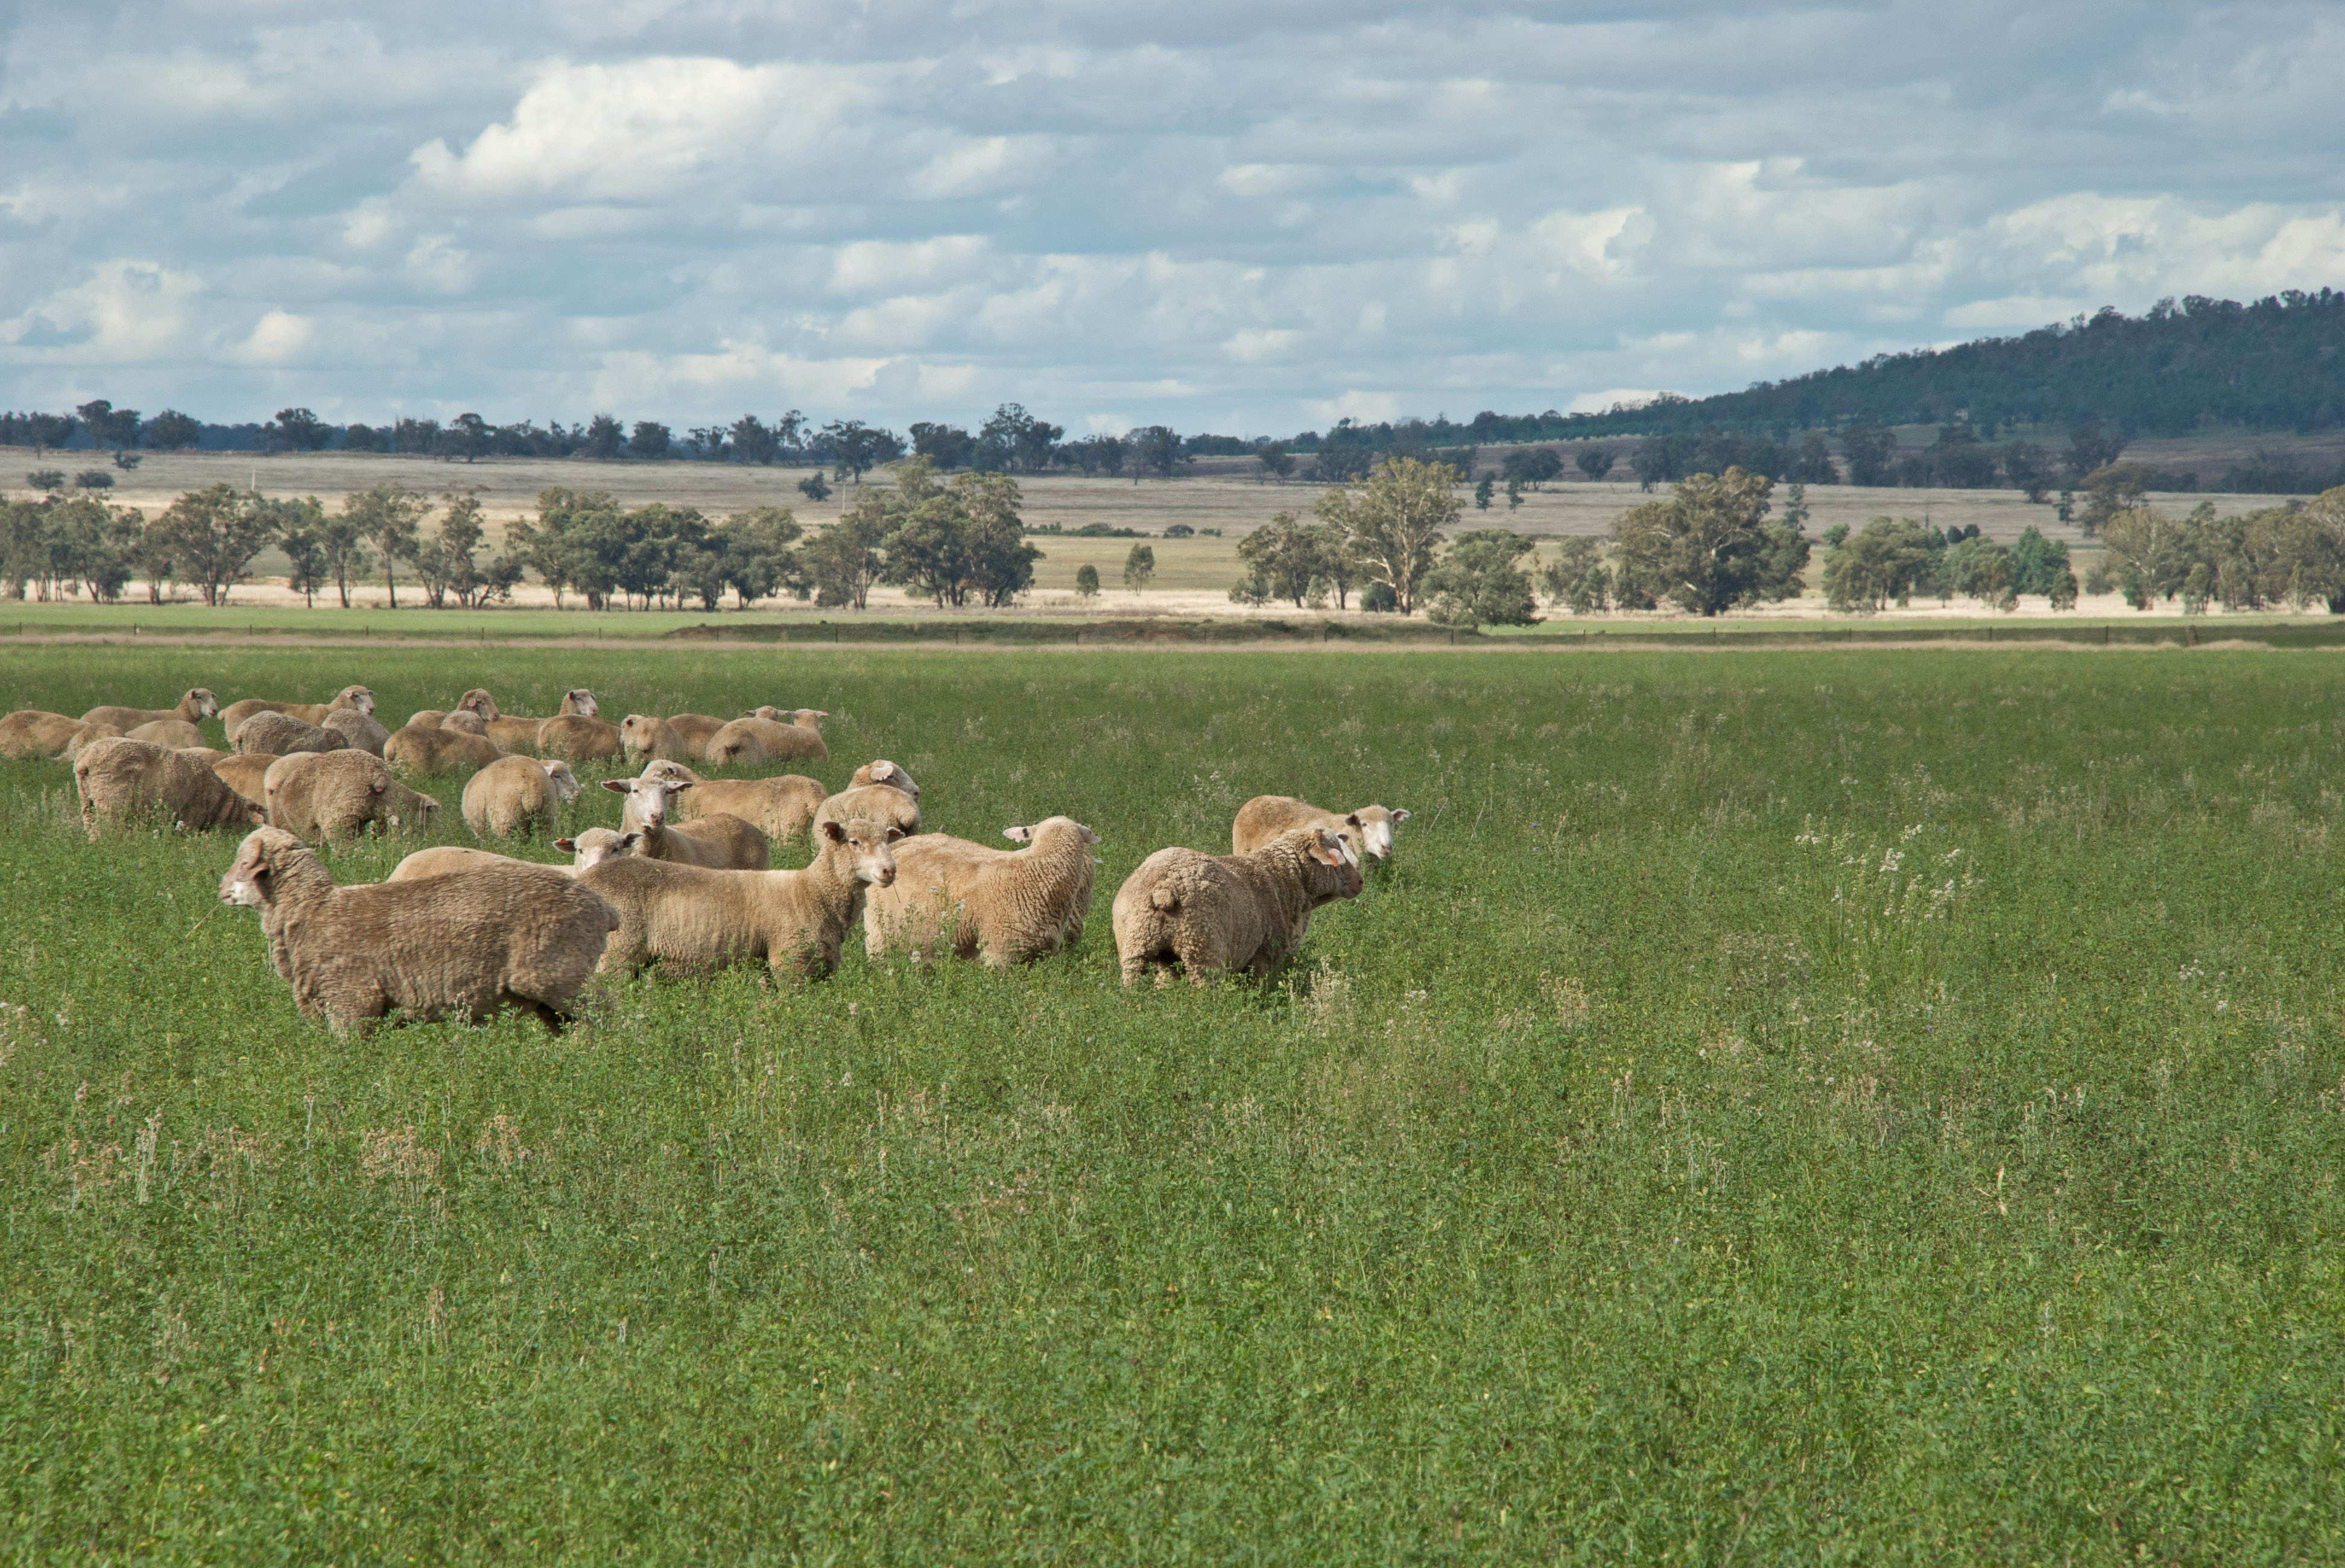 Sheep grazing, Afternoon, Paddock, Herd, Hill, HQ Photo